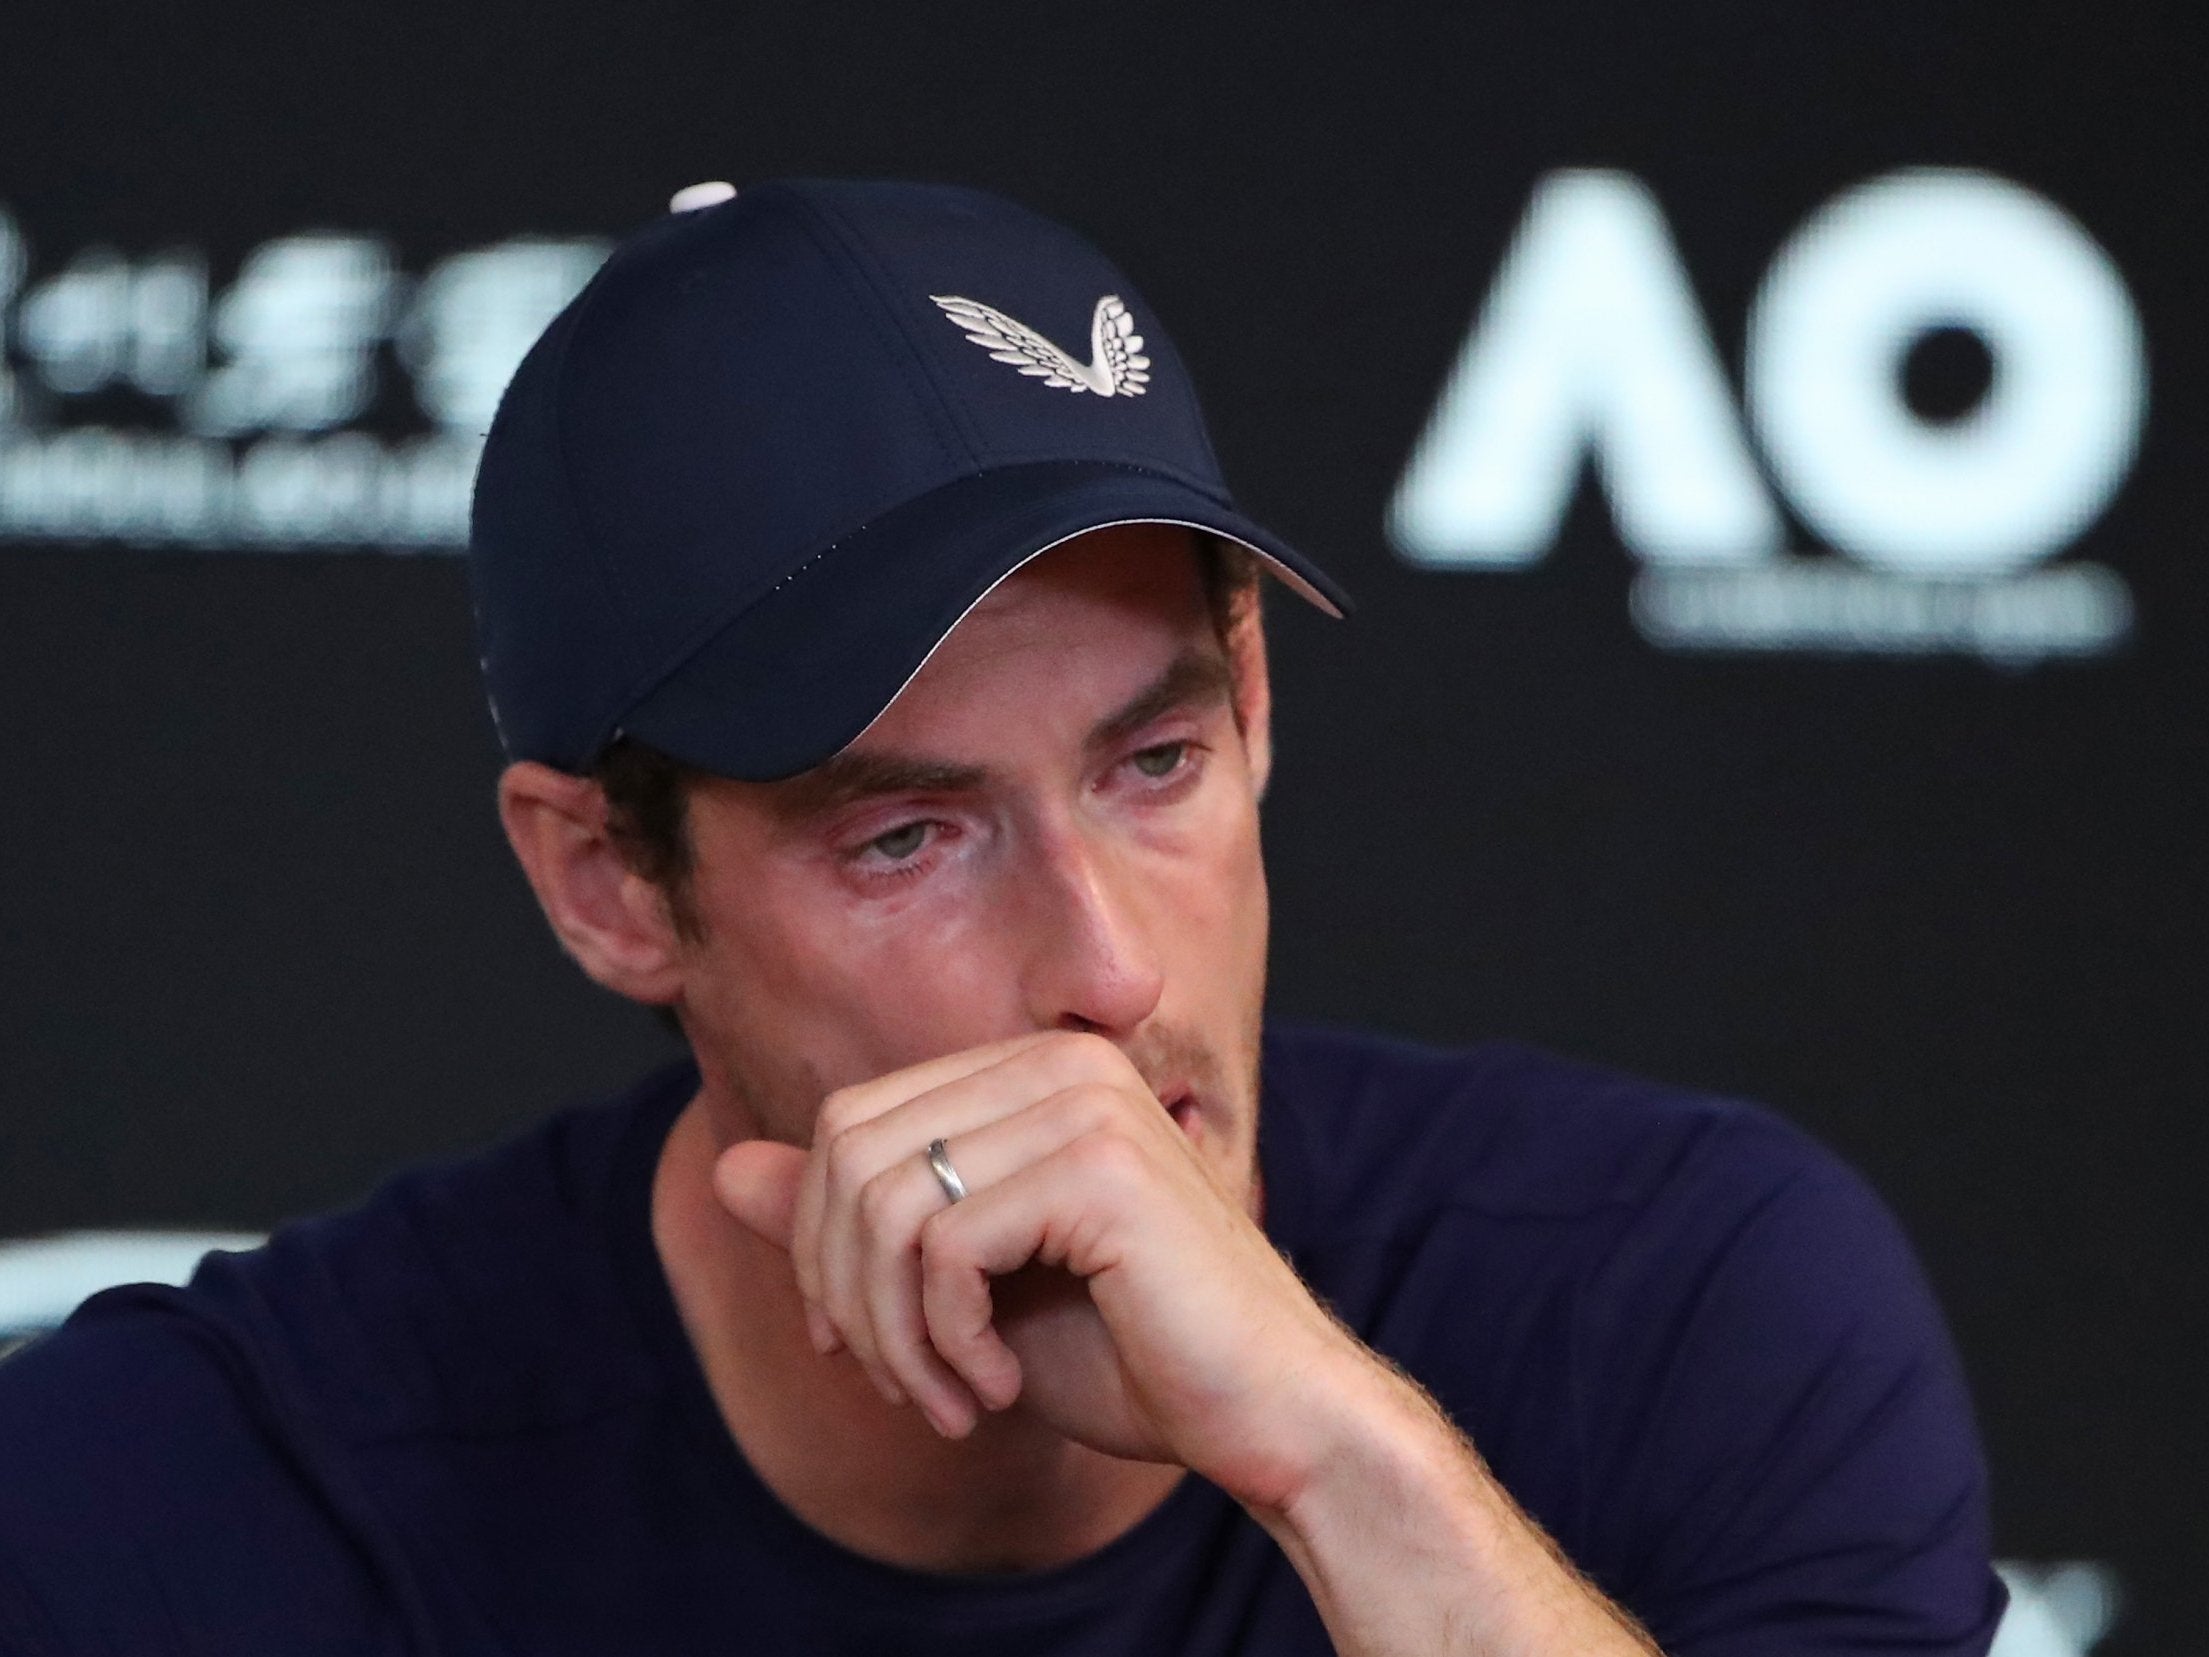 Andy Murray is set to quit tennis this year due to injury